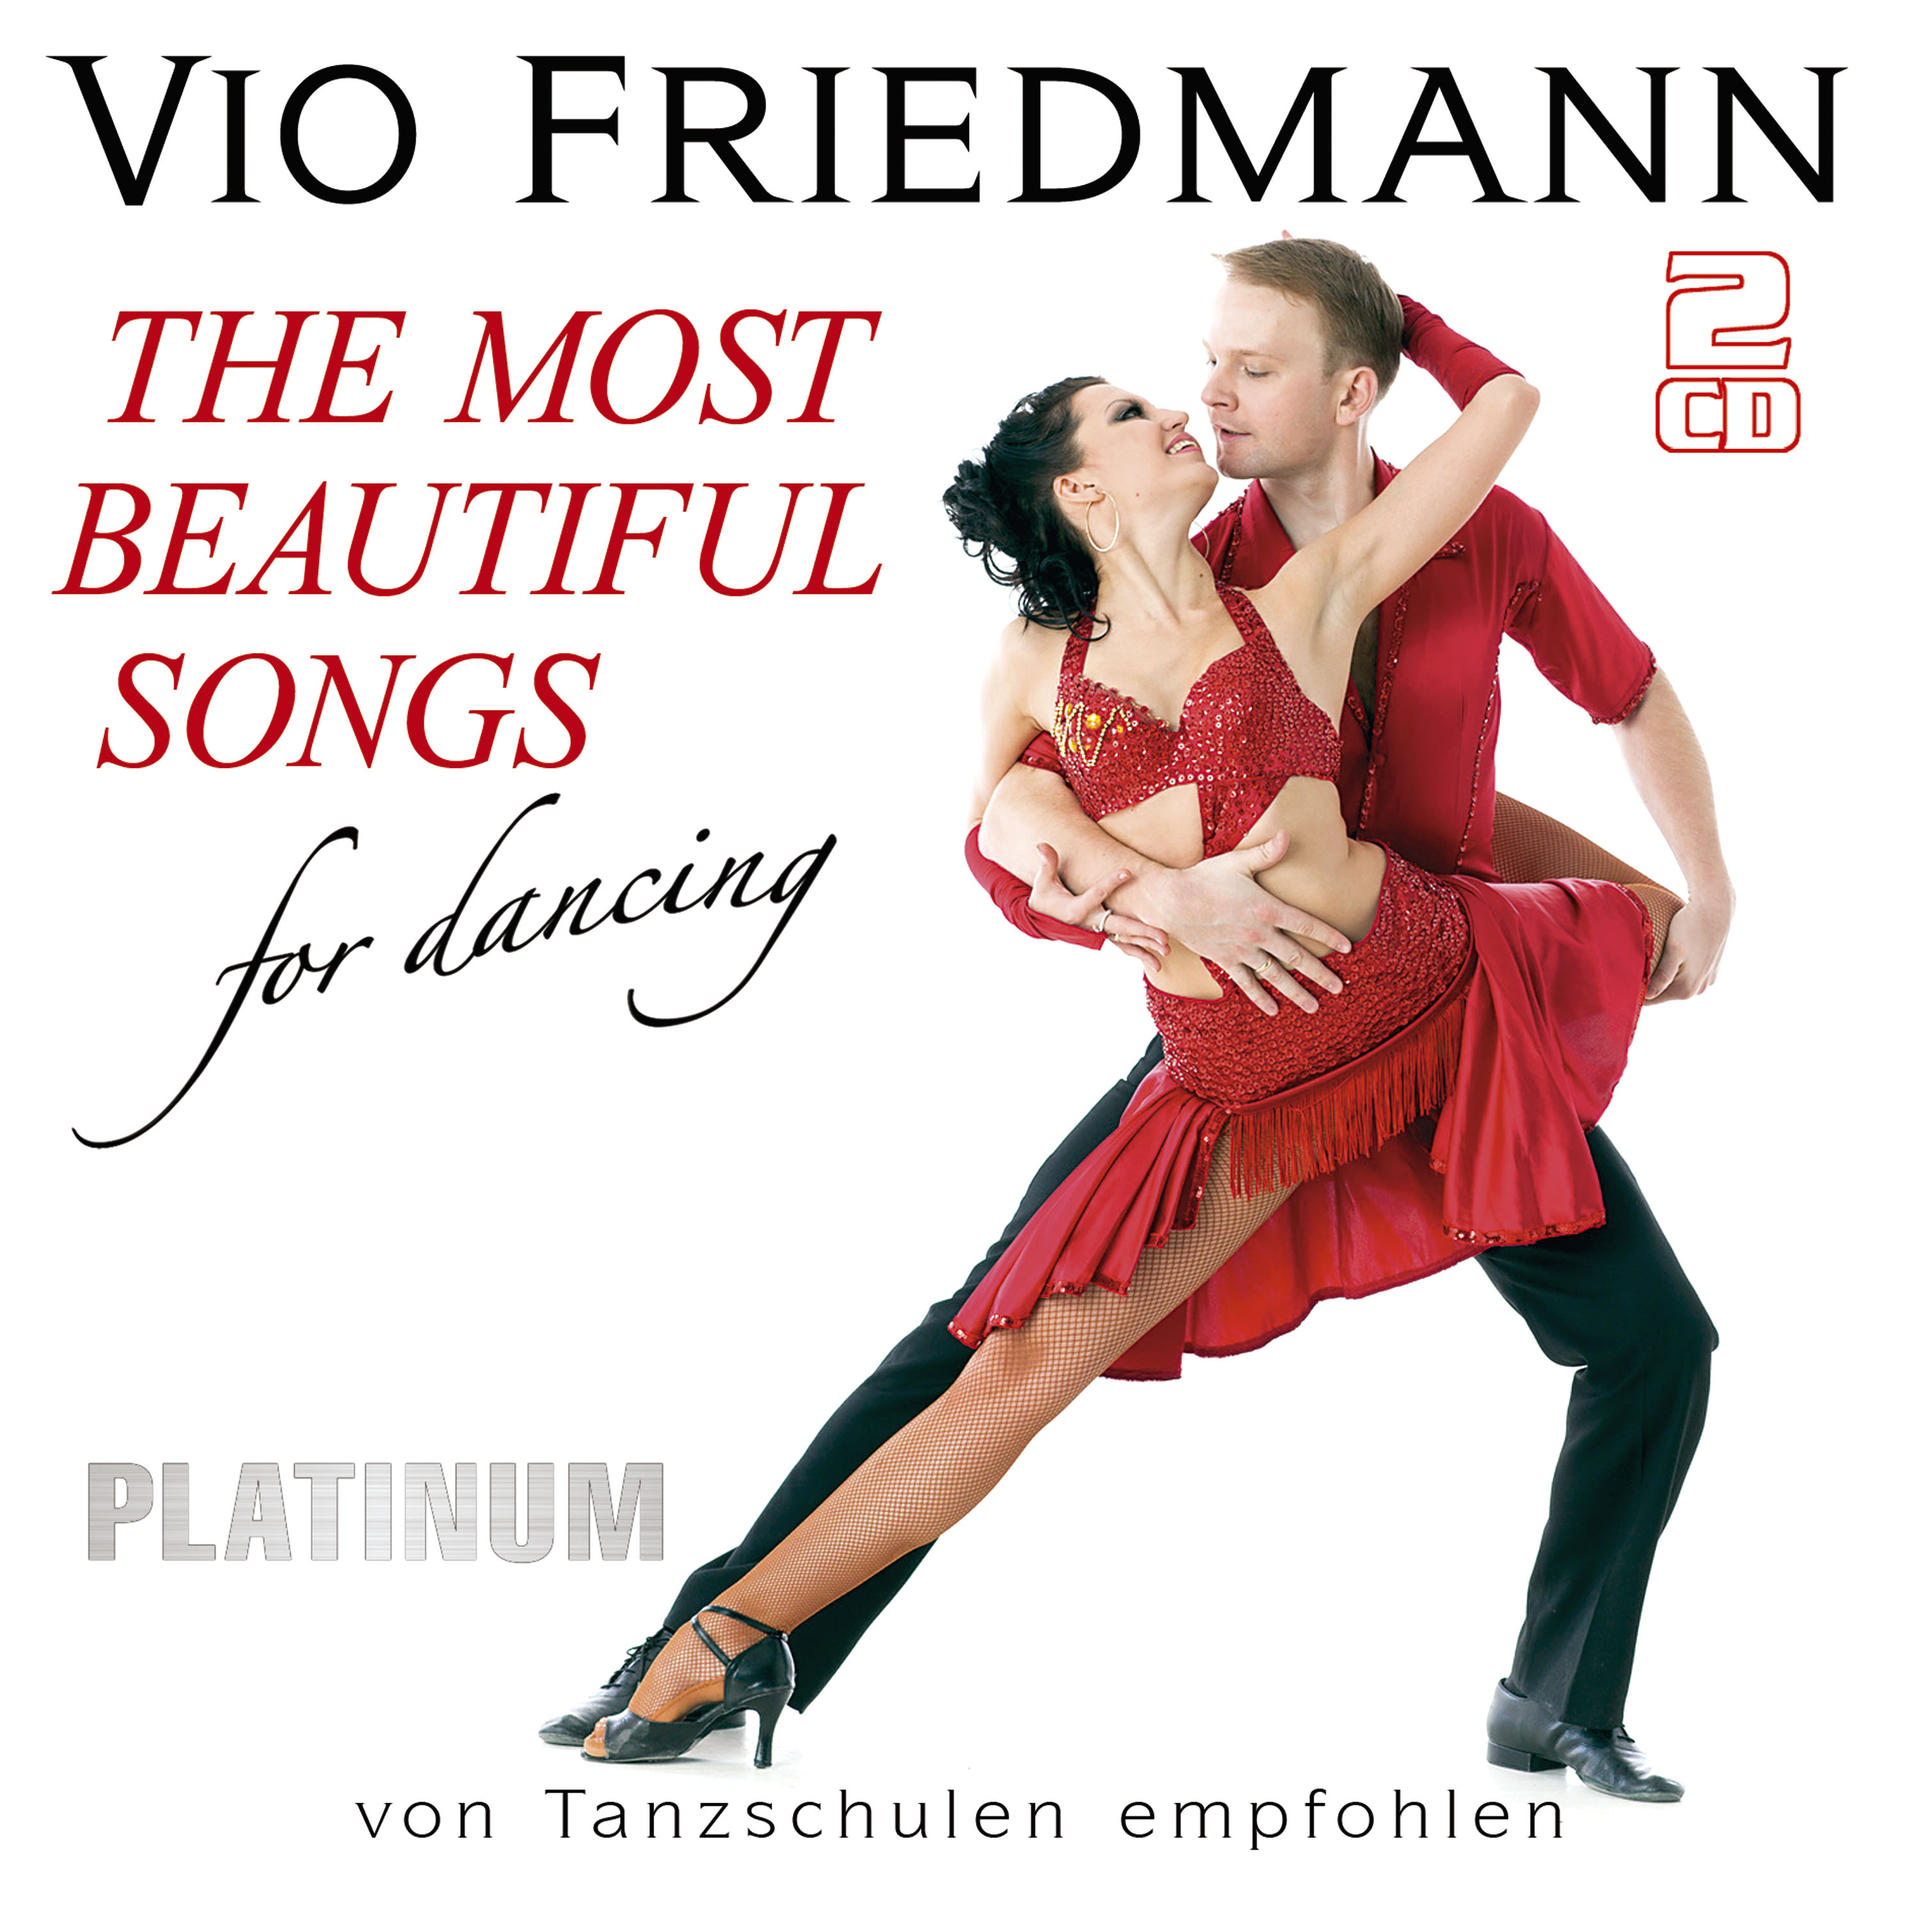 Vio Friedmann Songs For - - Dancing-Platinum Beautiful The Most (CD)